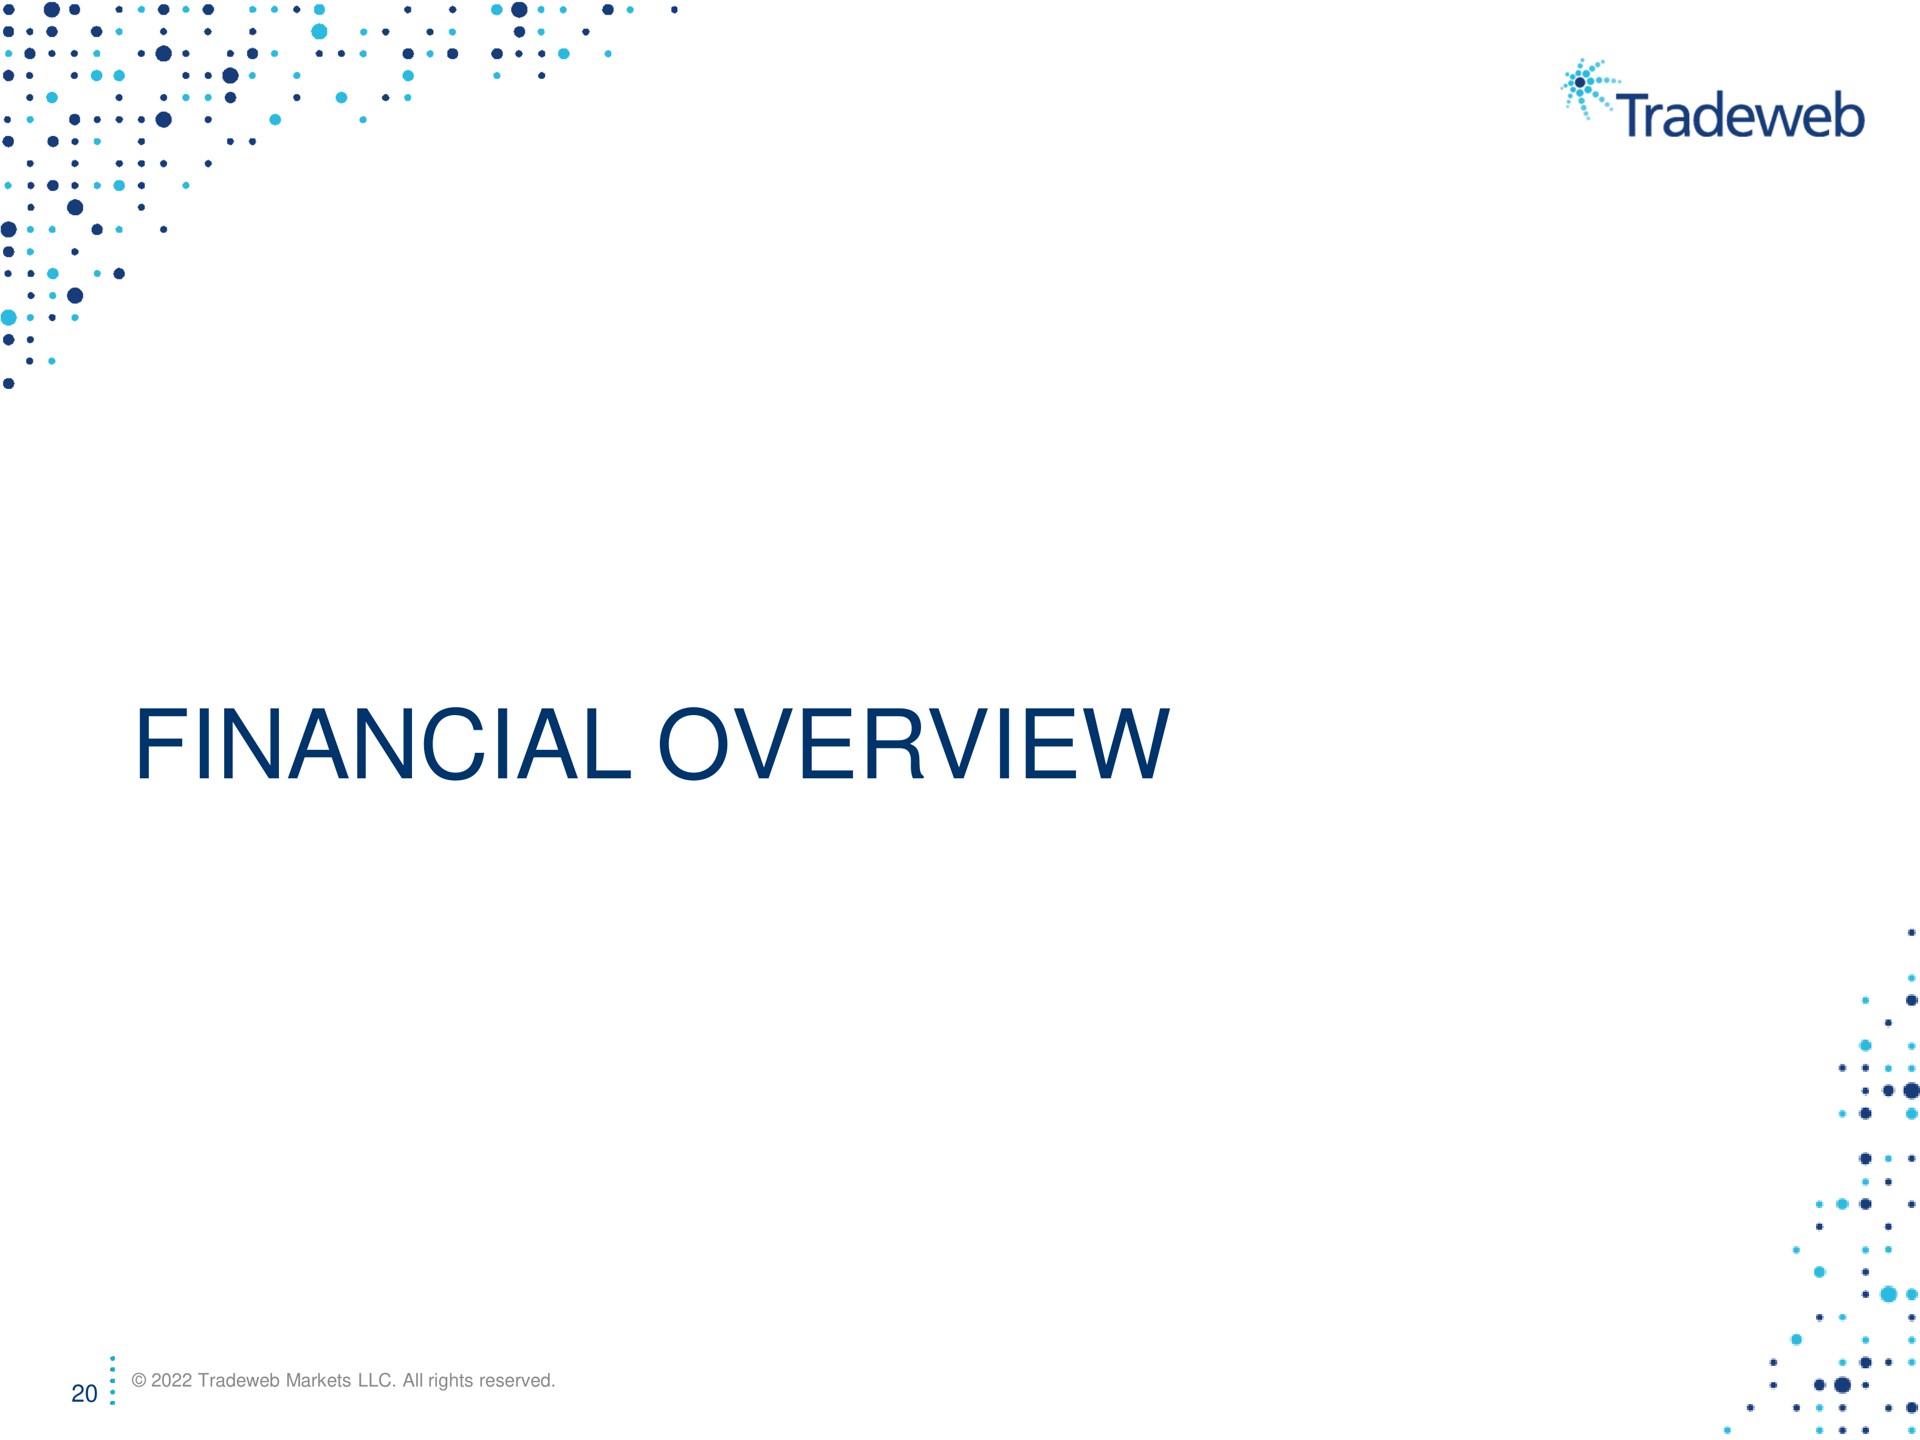 financial overview | Tradeweb